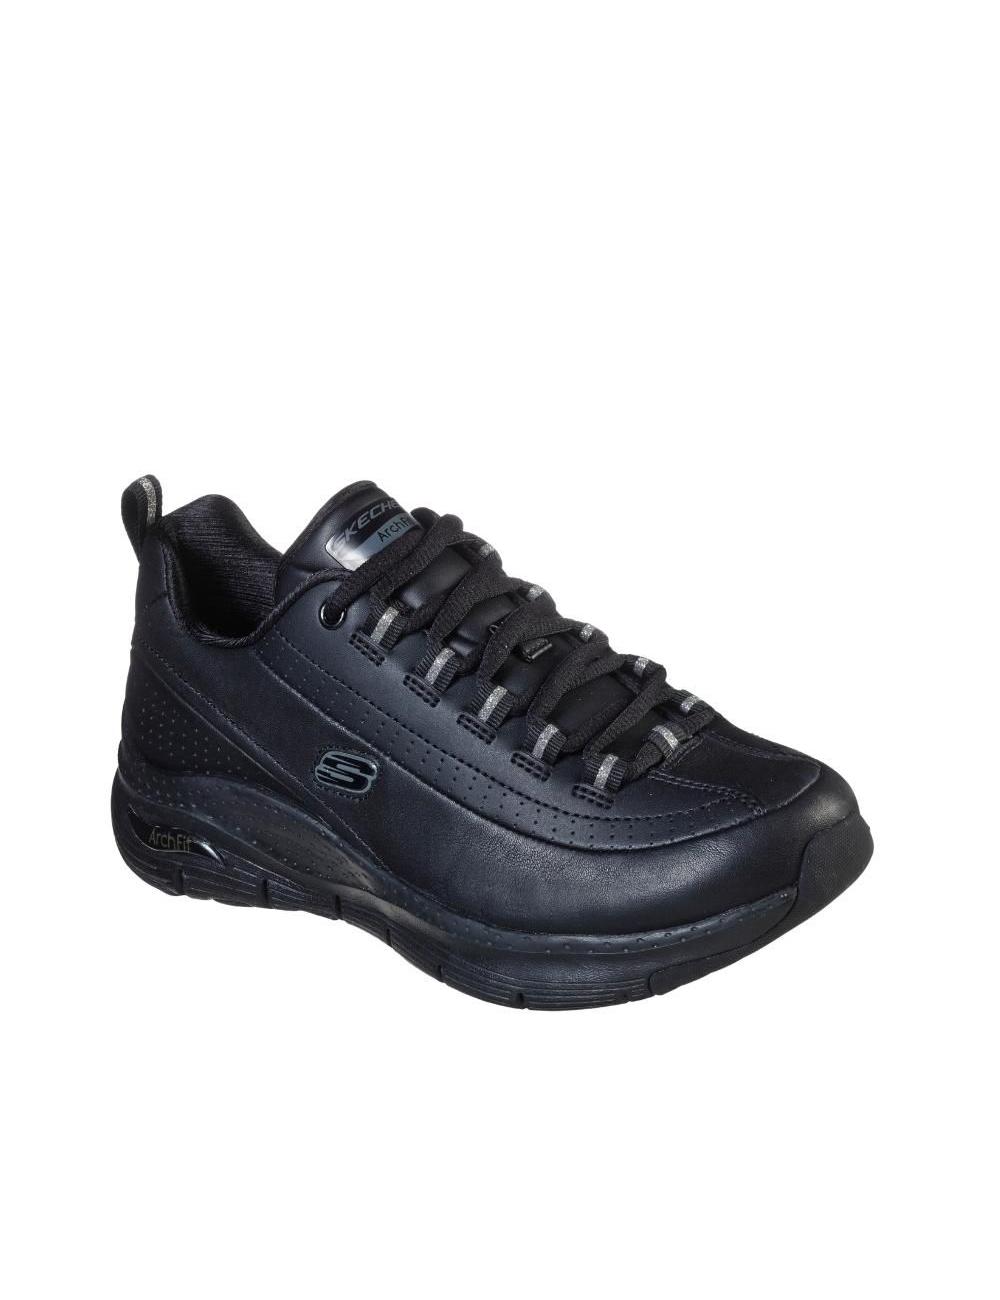 DEPORTIVAS PARA MUJER SKECHERS ARCH FIT-CITI DRIVE 149146